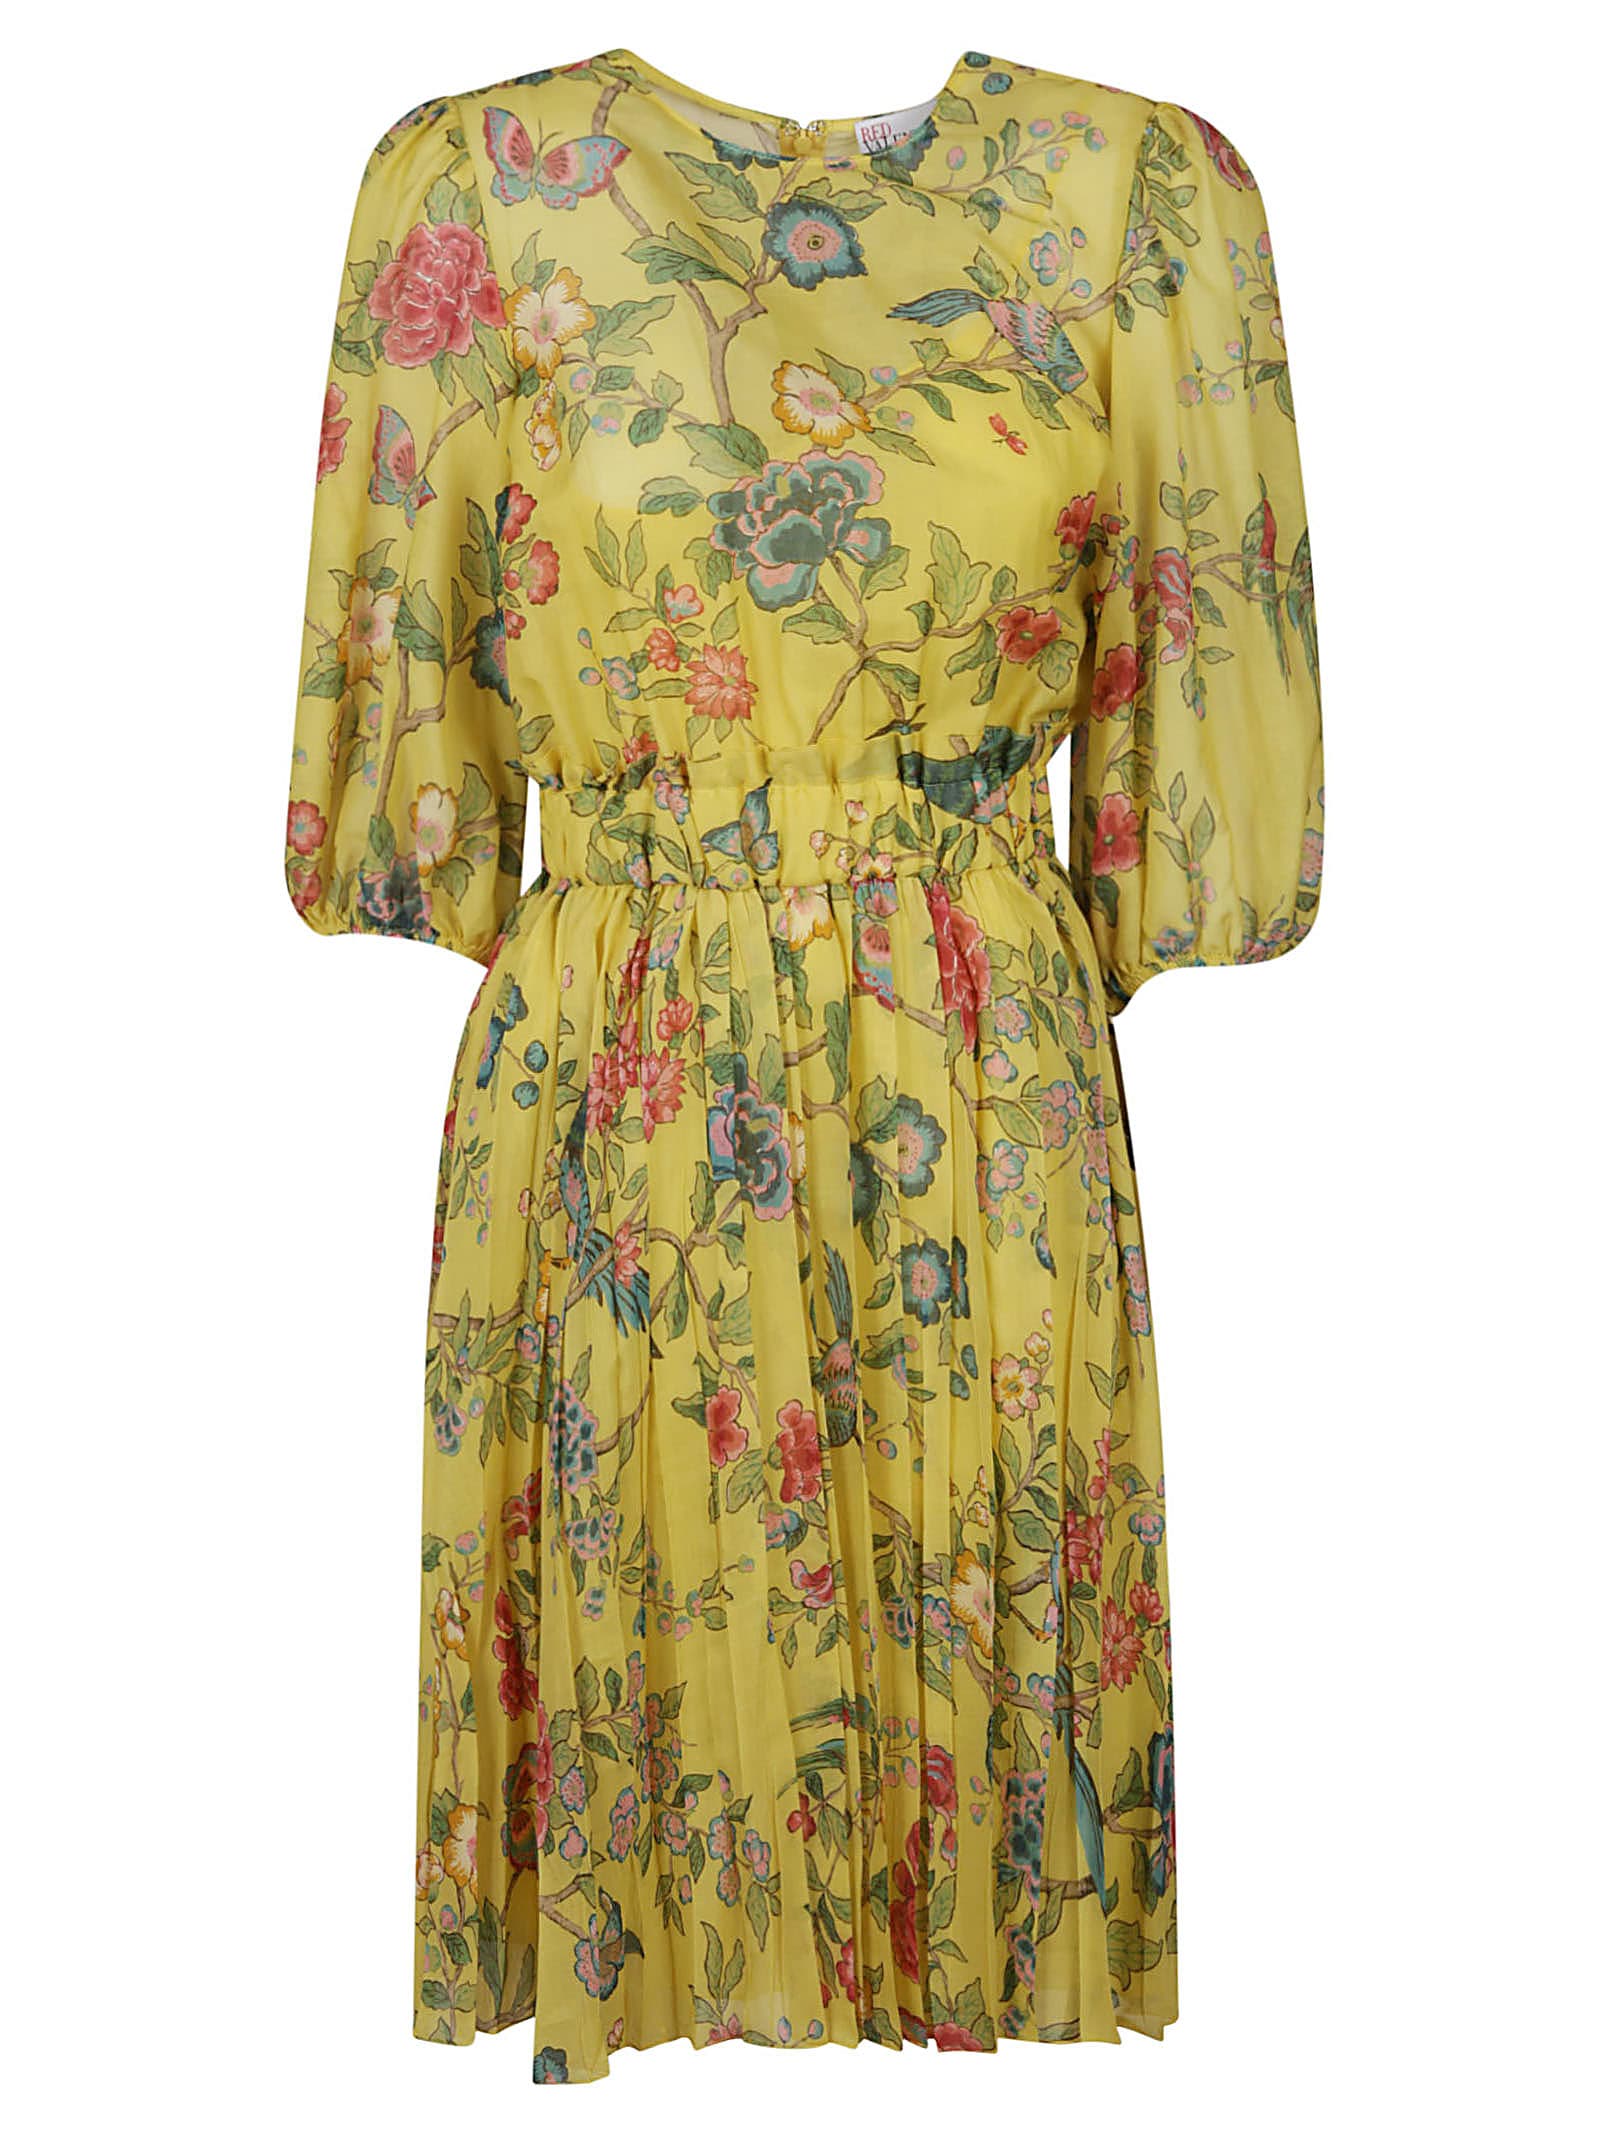 RED Valentino Floral Print Pleated Dress